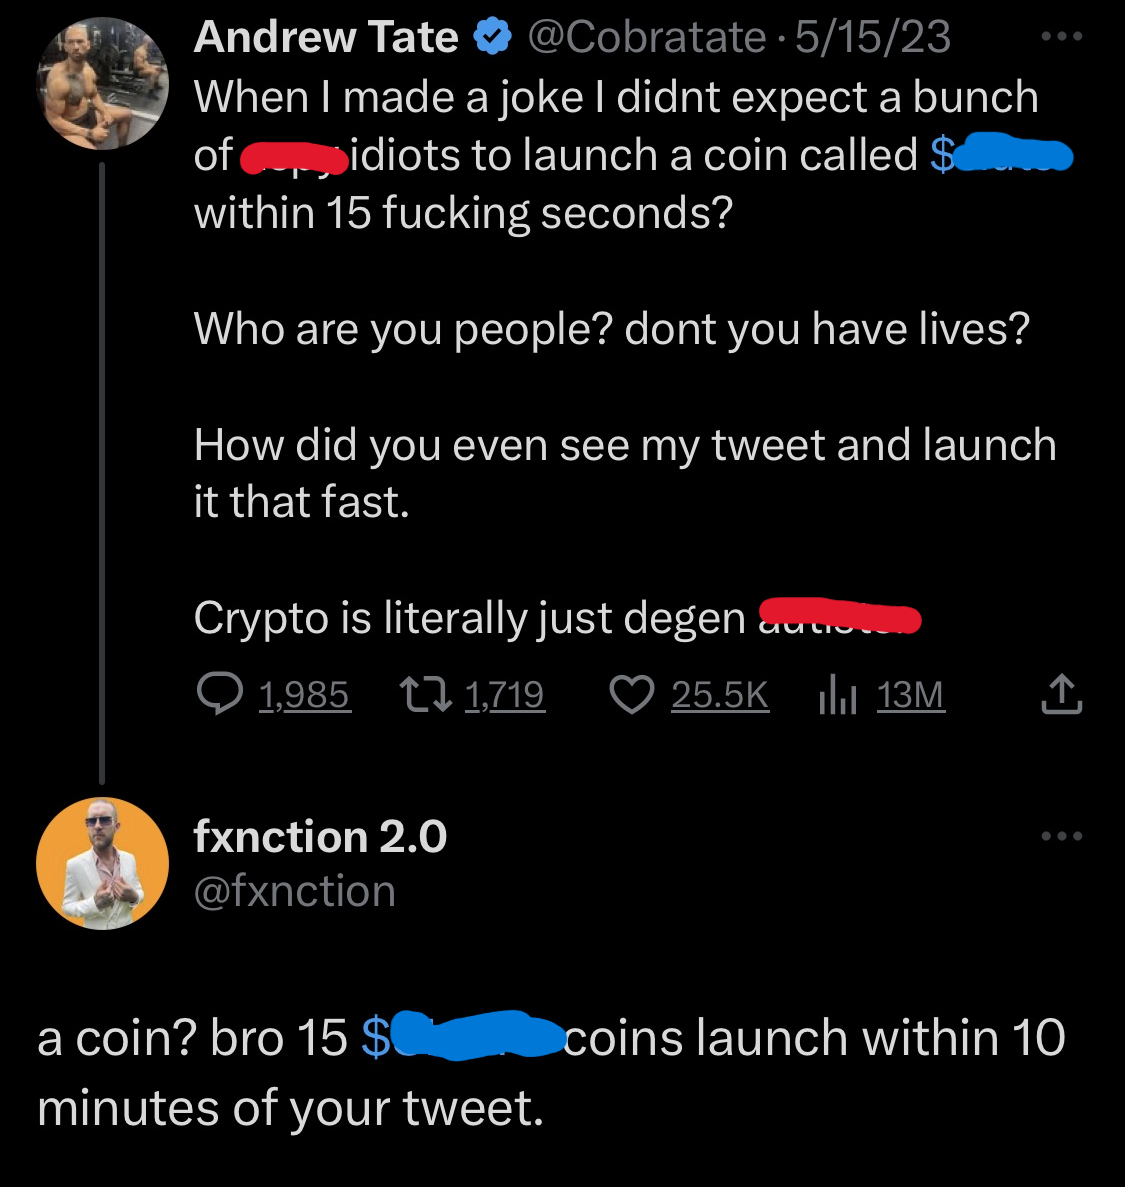 15 sh!tcoins launch within 10 minutes of a dummy's tweet